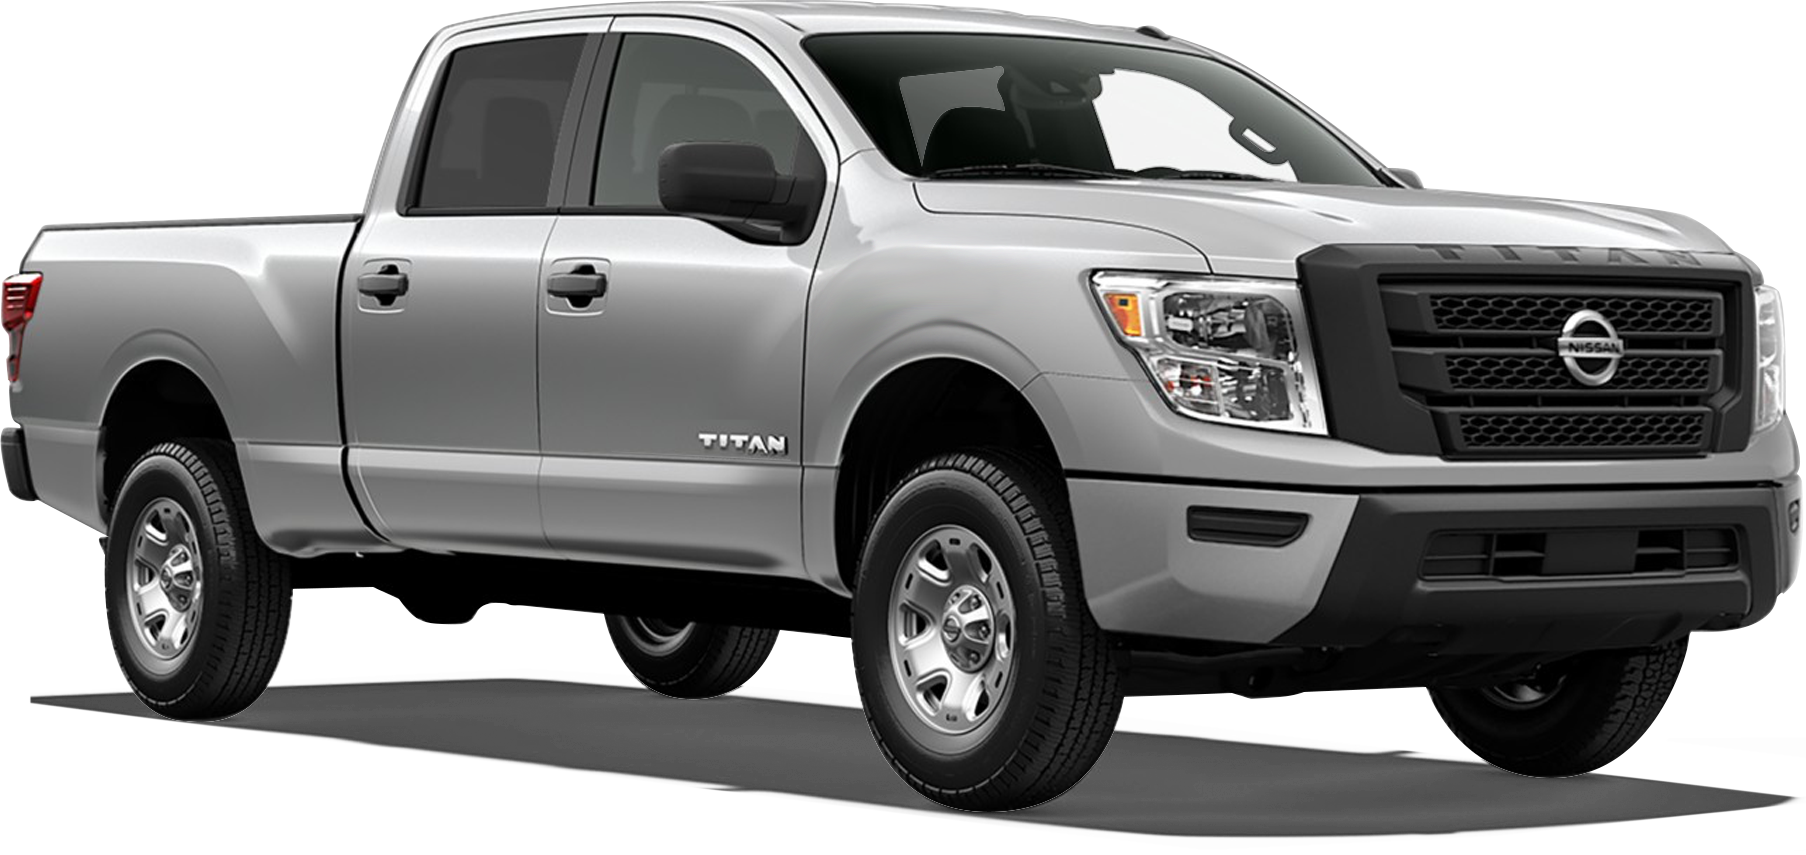 http://images.dealer.com/ddc/vehicles/2021/Nissan/Titan/Truck/trim_S_32ae6e/perspective/front-right/2021_24.png